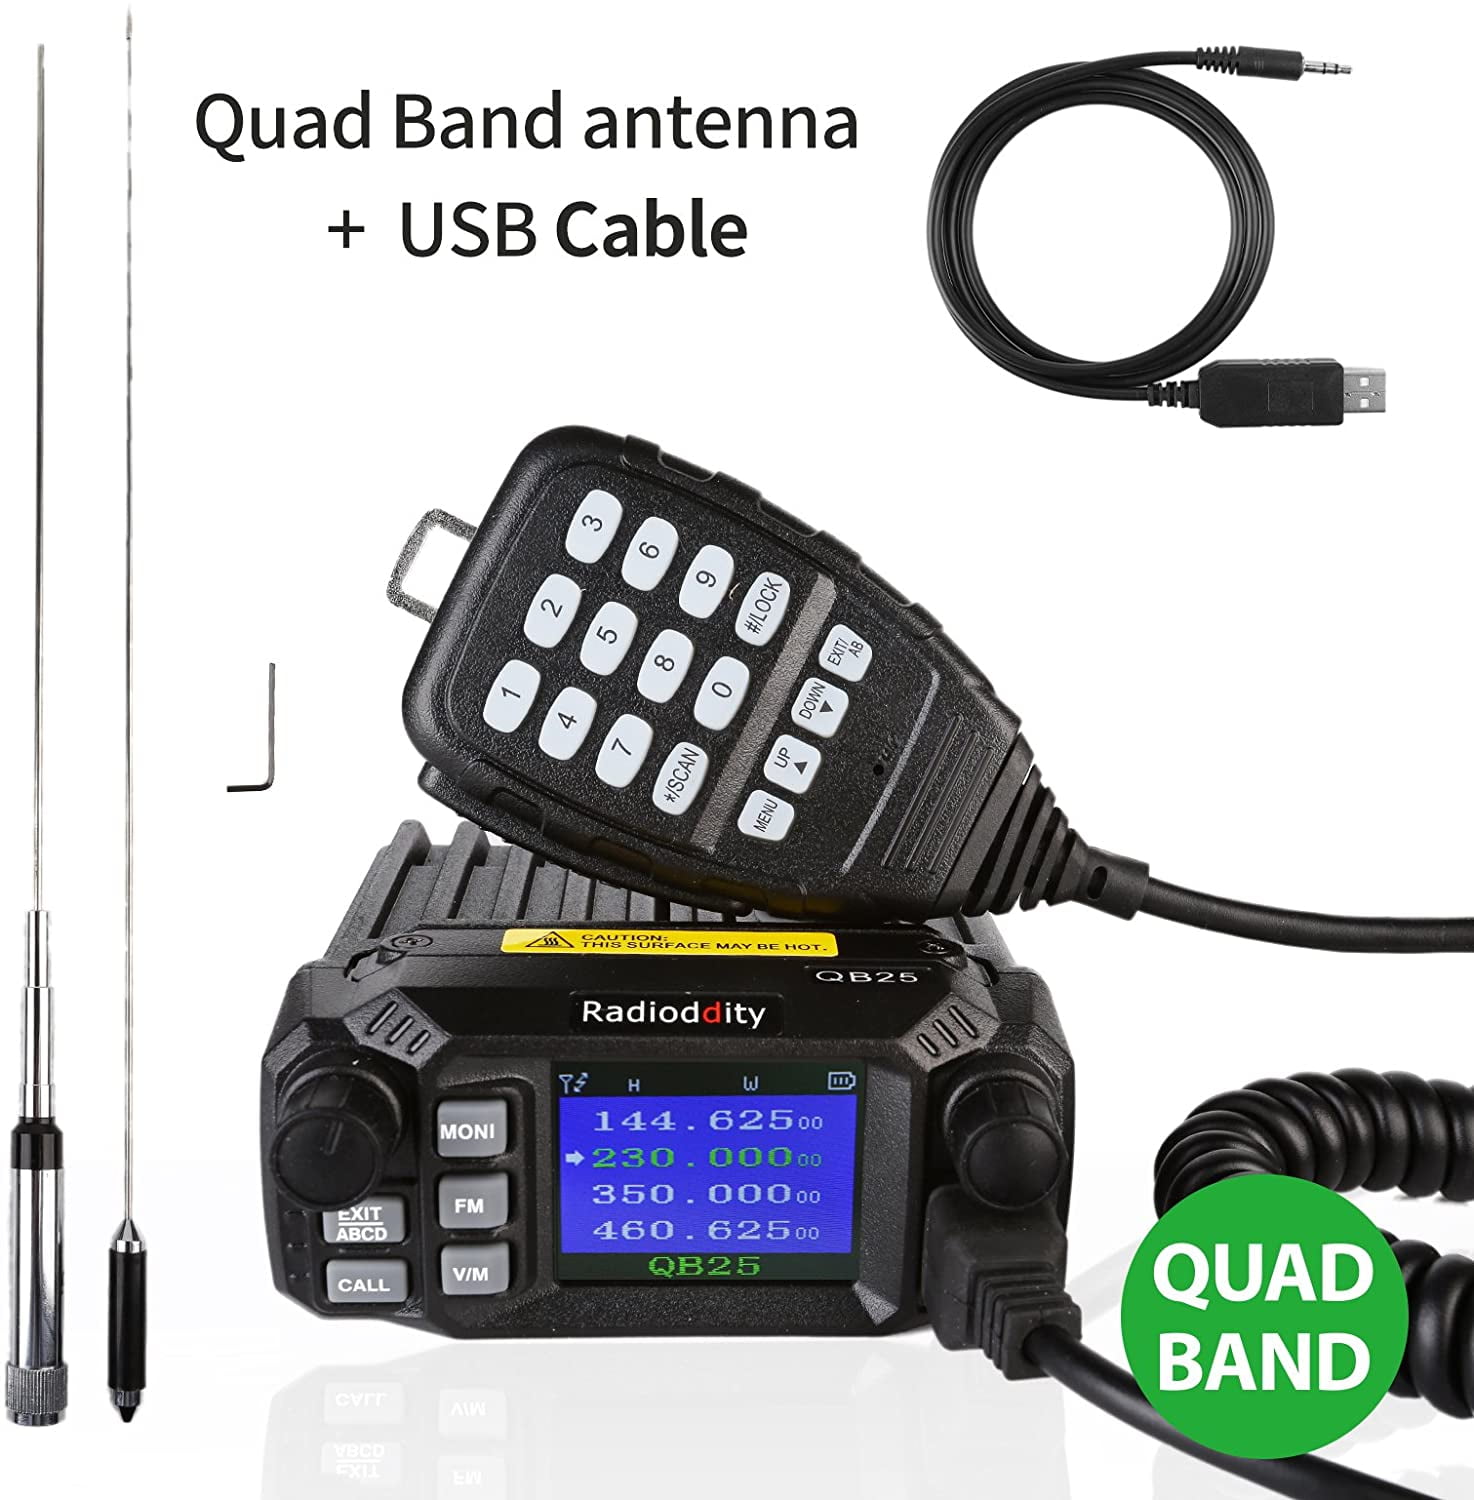 Radioddity QB25 Pro Quad Band Quad-Standby Mobile Ham Amateur Radio Transceiver Car Truck Vehicle Radio, VHF UHF 25W with Cable + 50W High Gain Quad Band Antenna Adult Picture